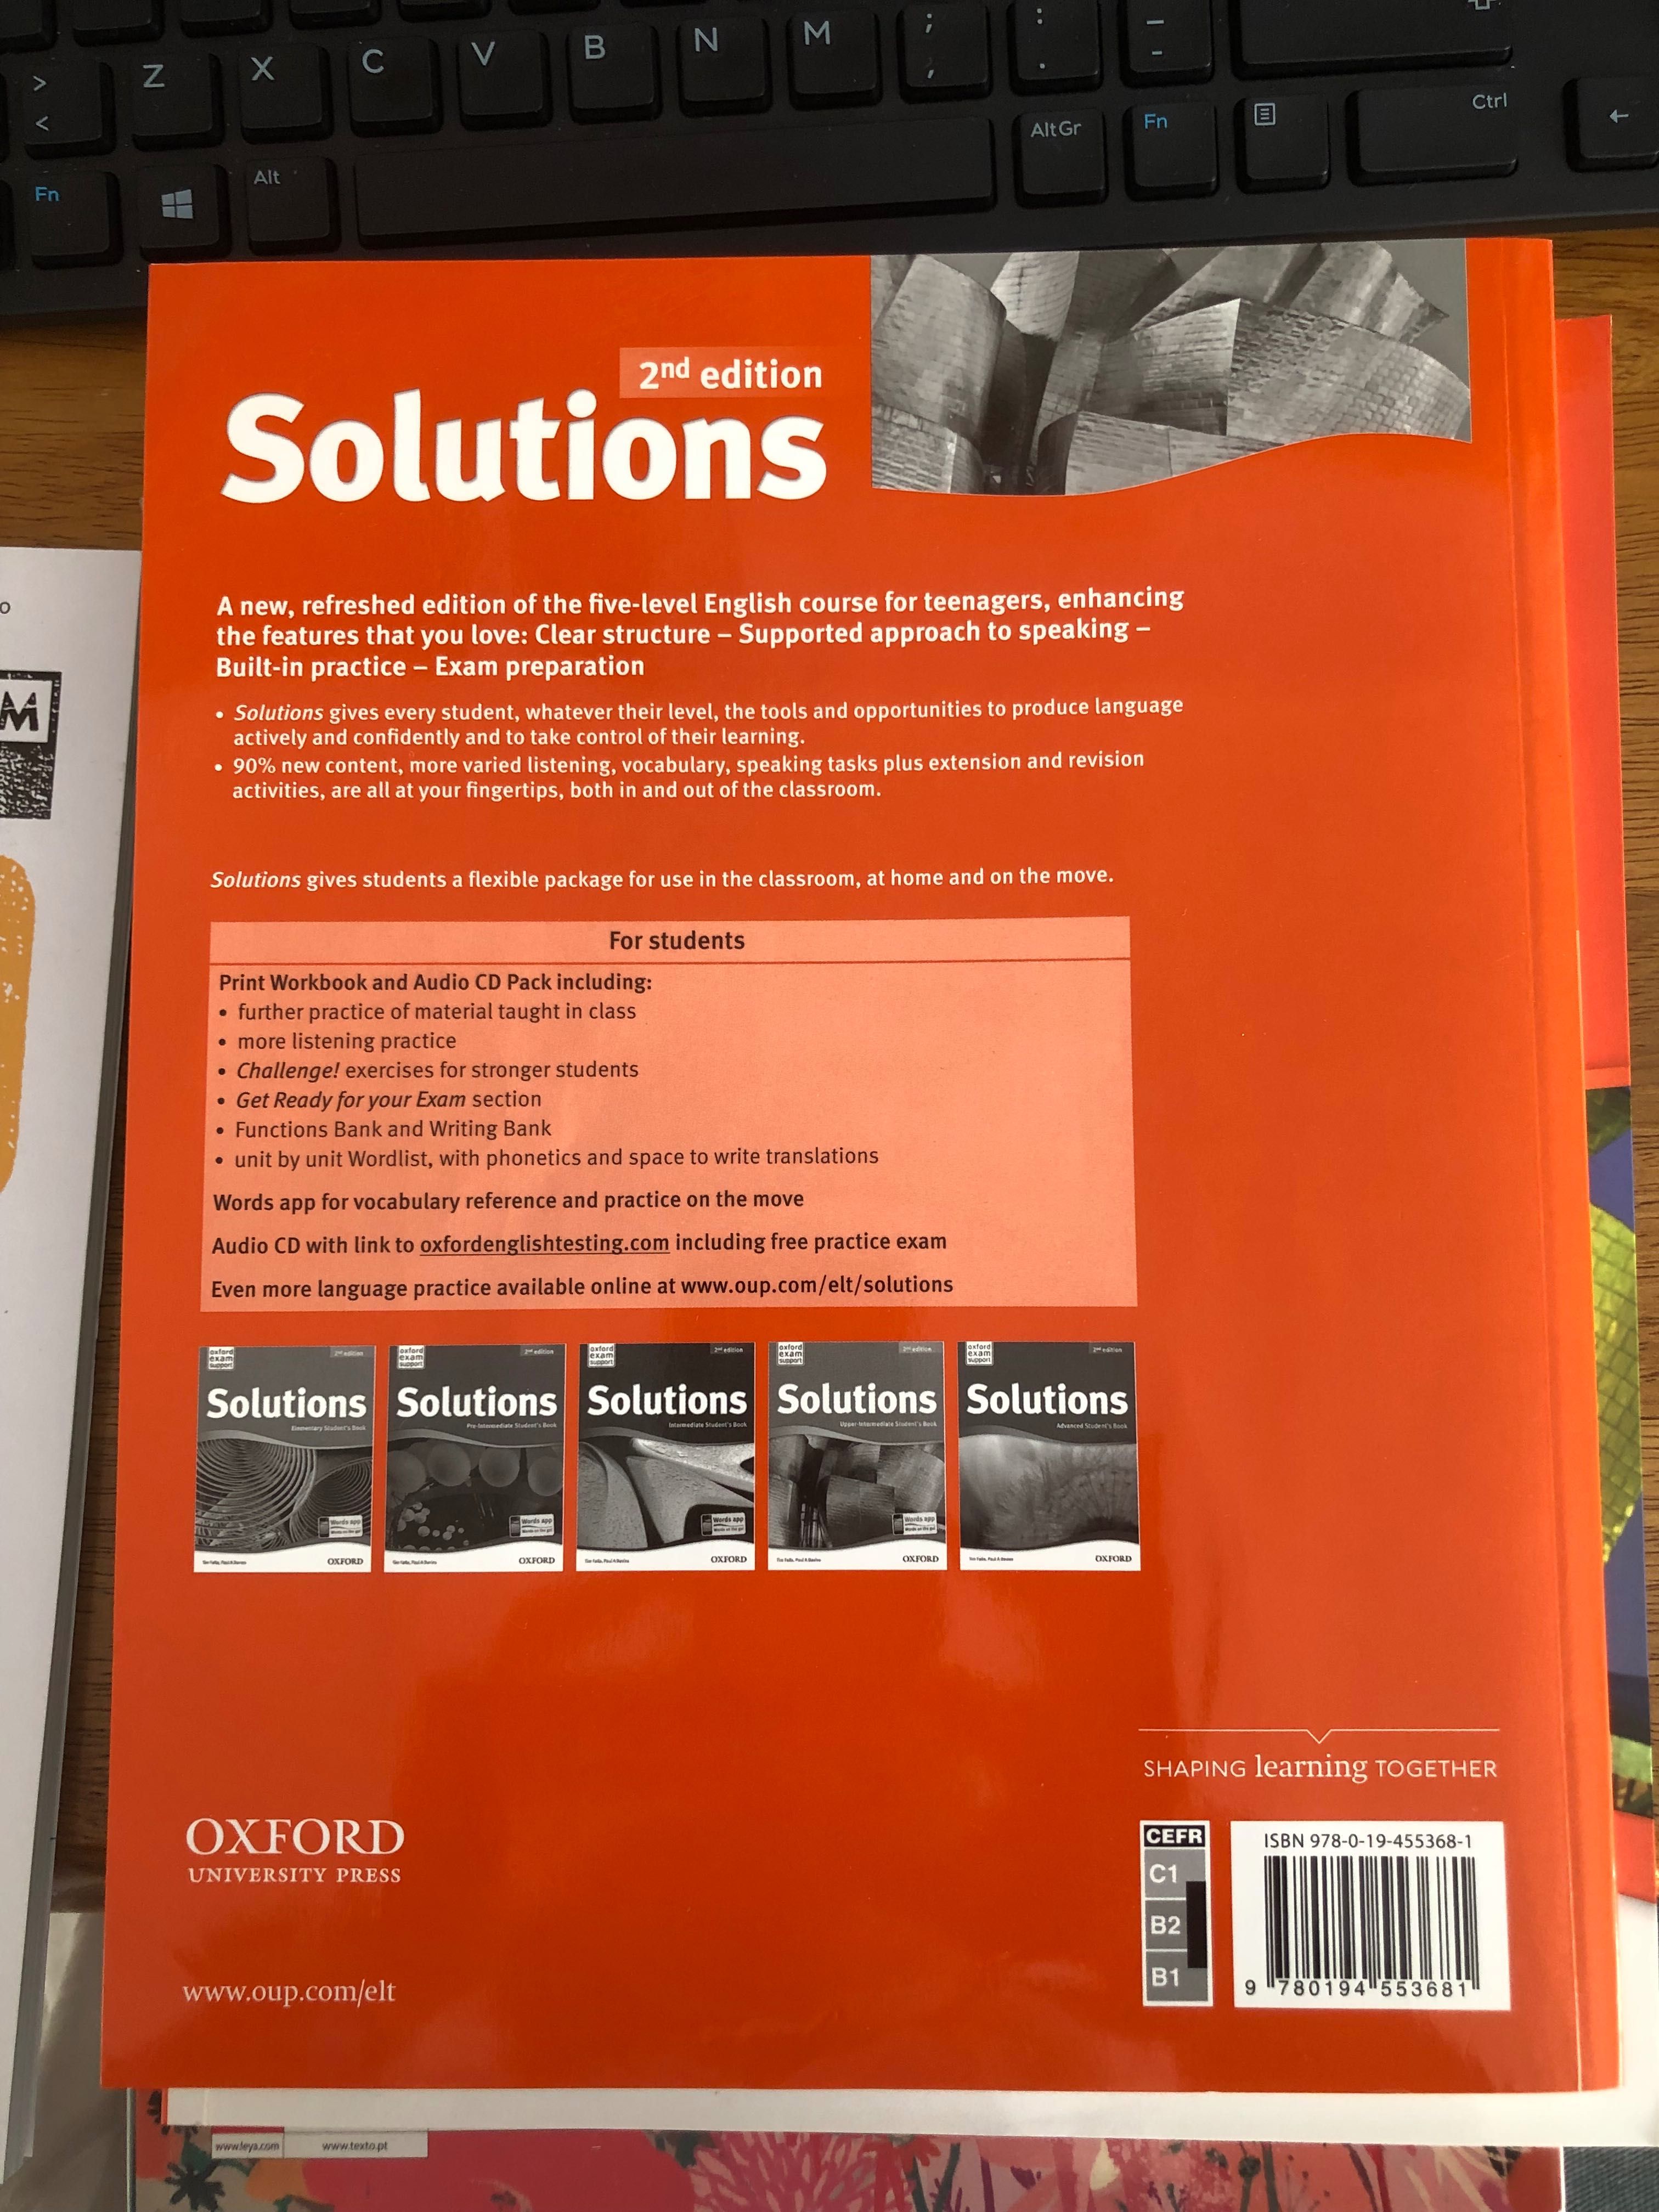 Solutions- Oxford exam support